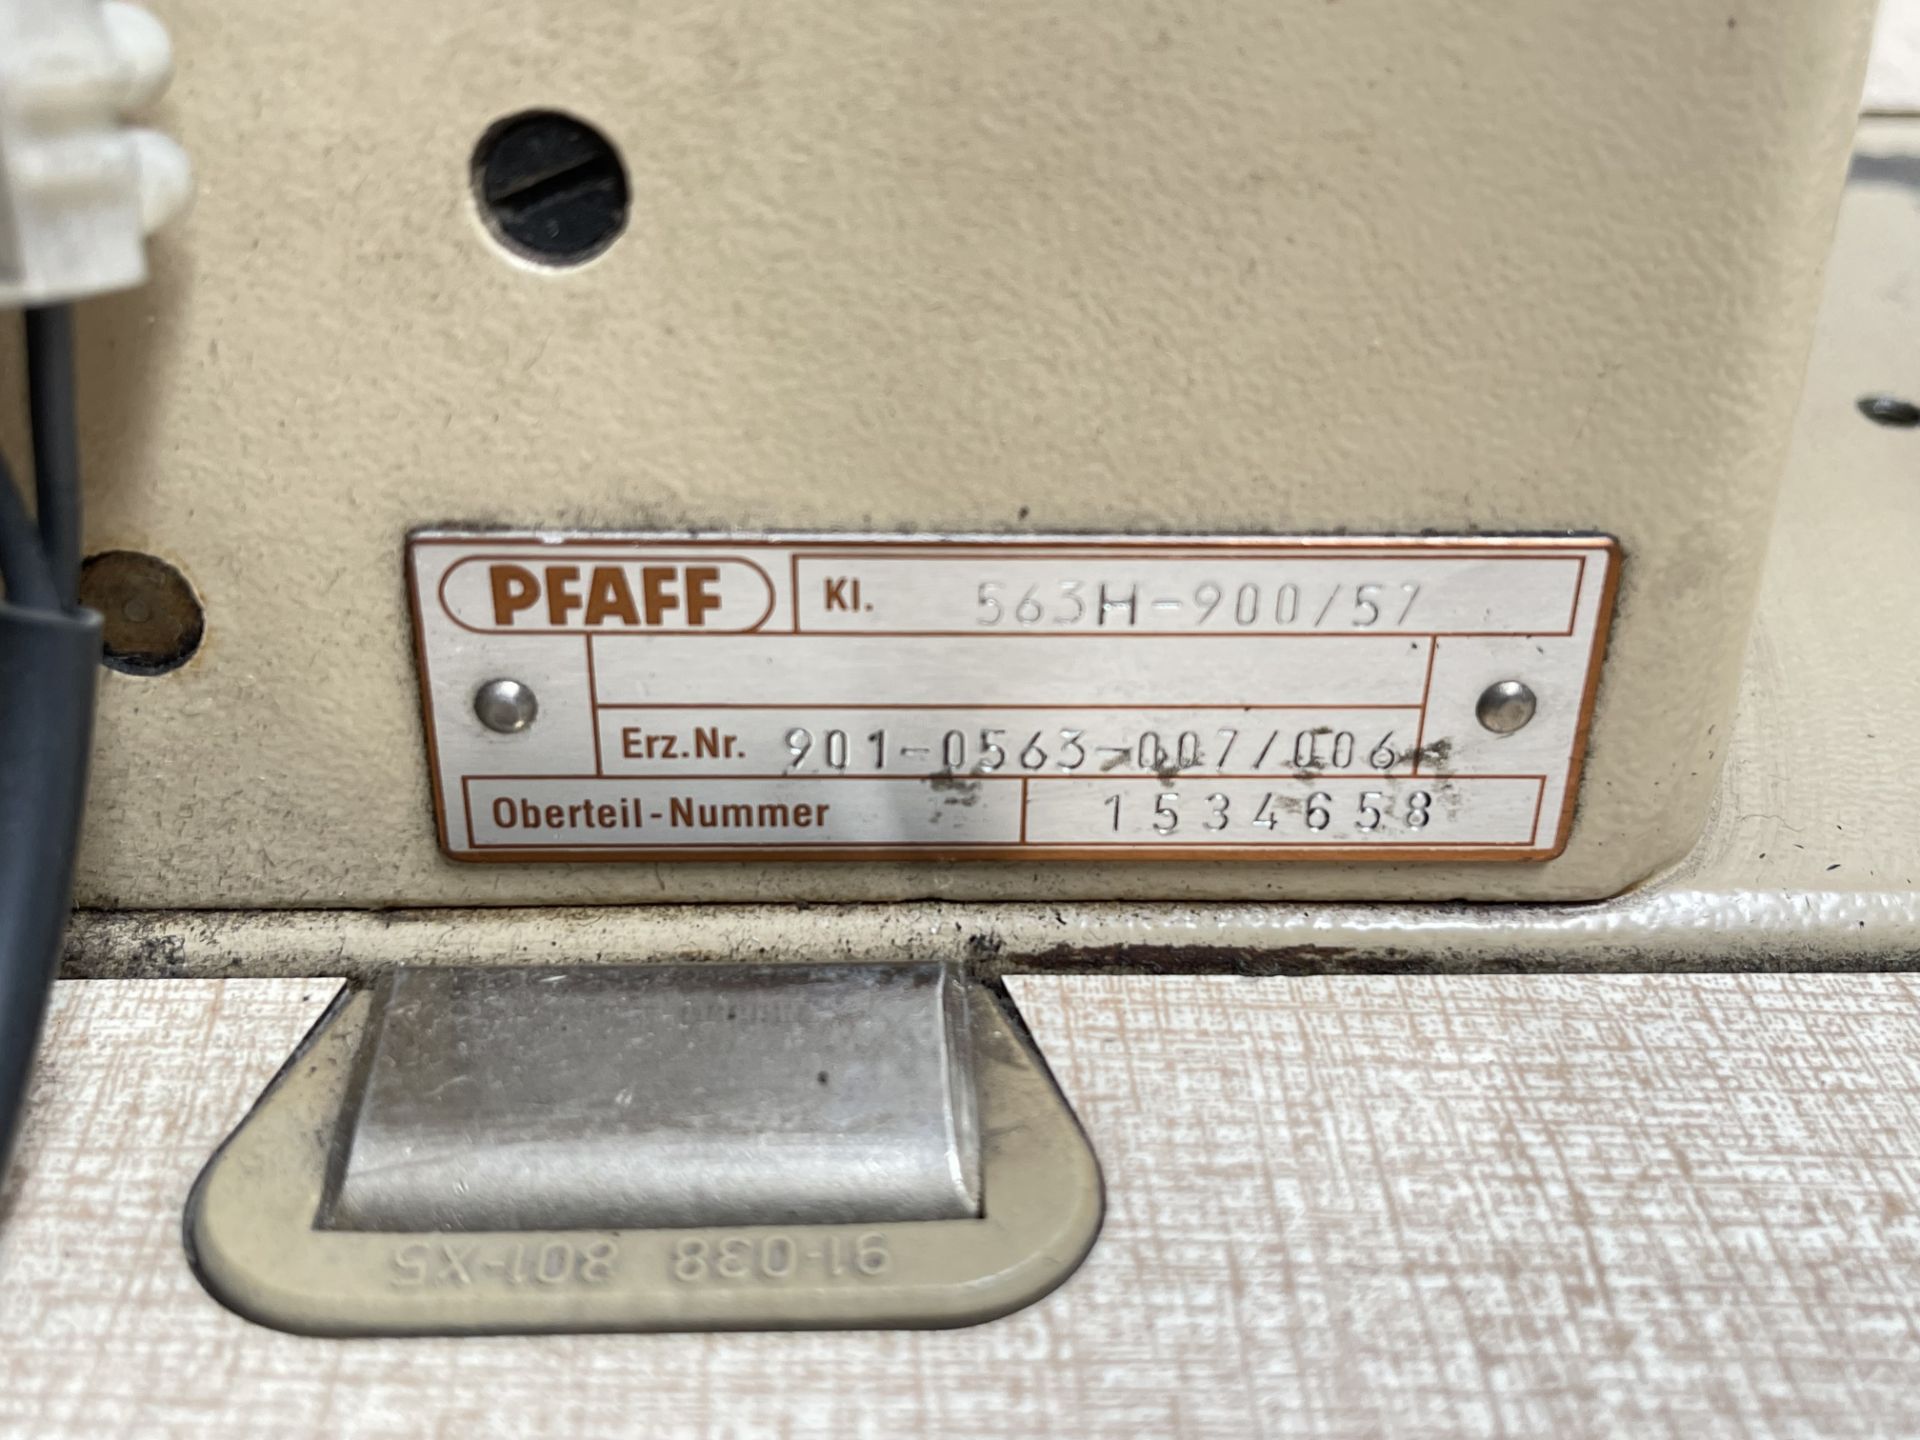 Pfaff 563H-900/57 Industrial Sewing machine. S/No 1534658 - Image 7 of 7